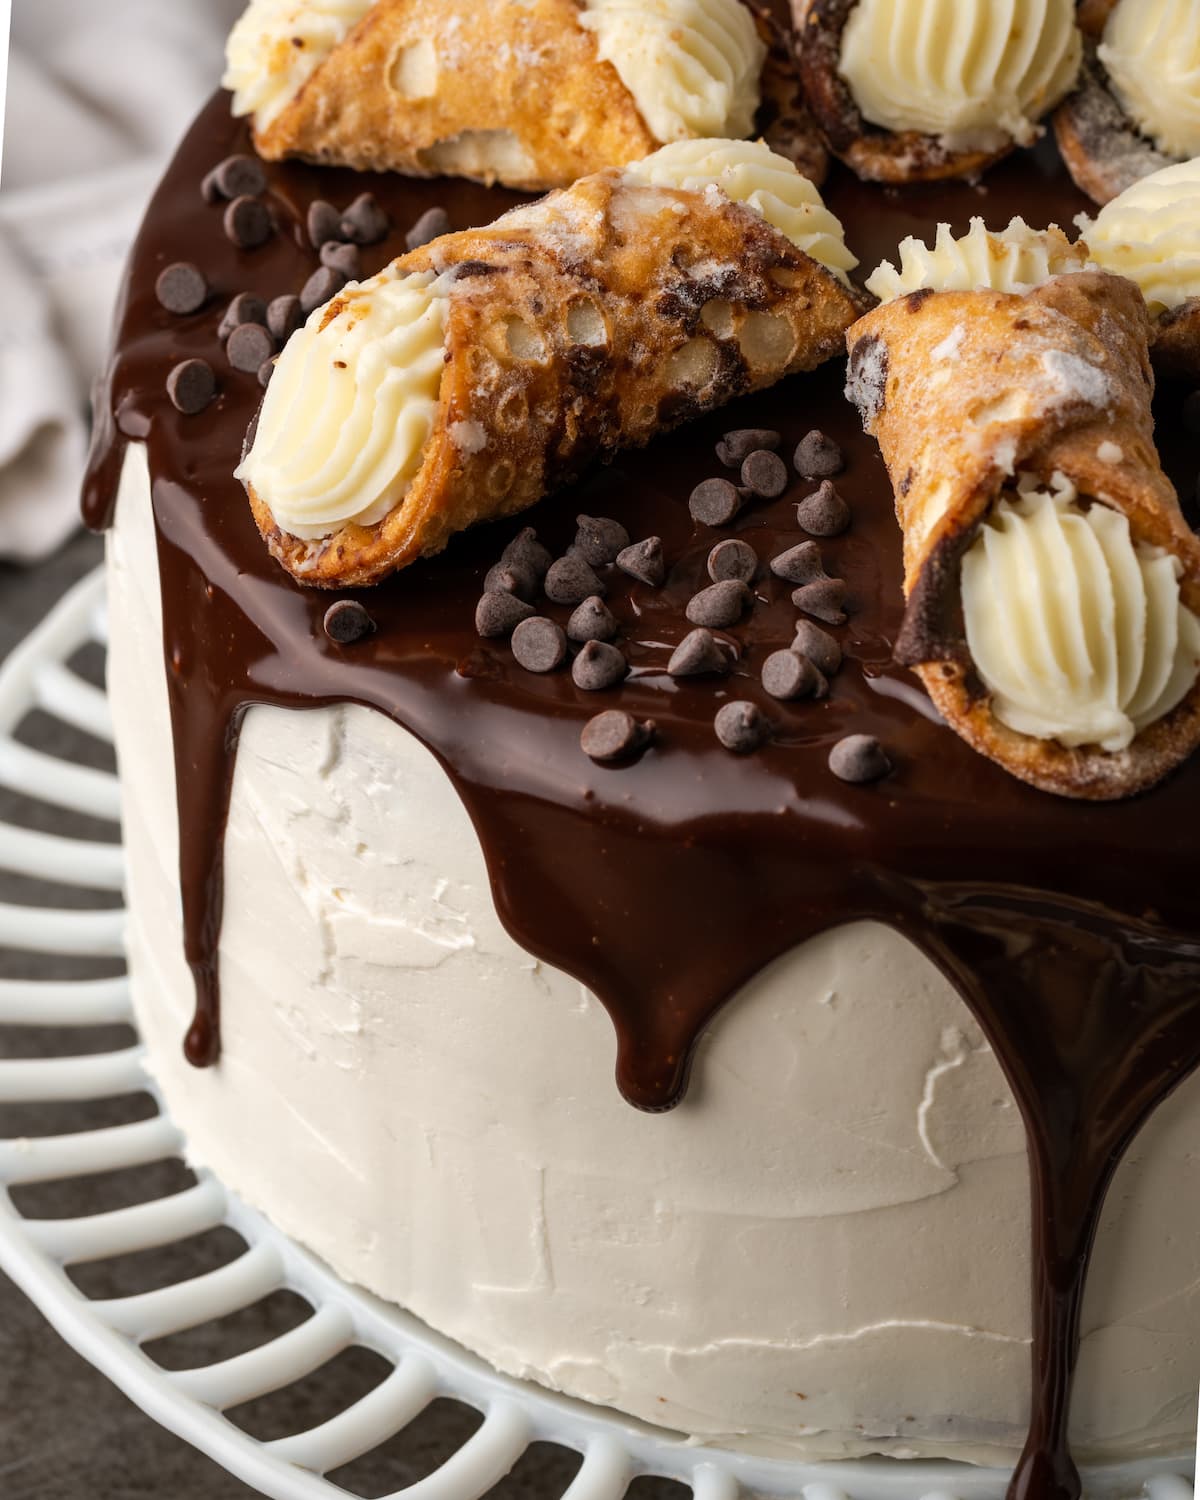 Top view of cannoli cake on a cake stand drizzled with chocolate ganache and garnished with cannoli pastries.